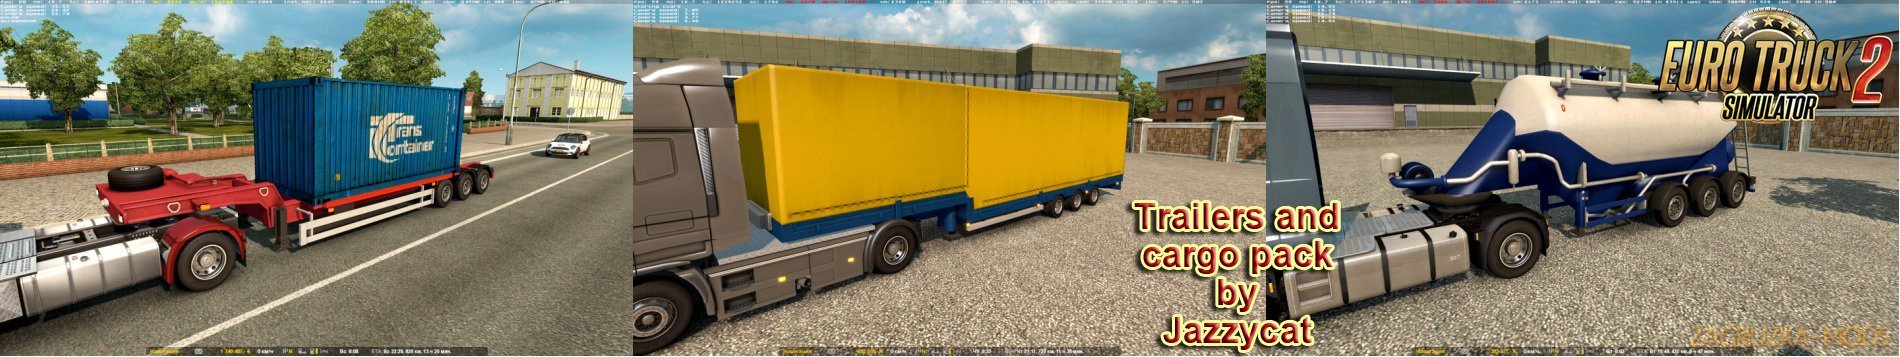 Trailers and Cargo Pack v5.2 by Jazzycat